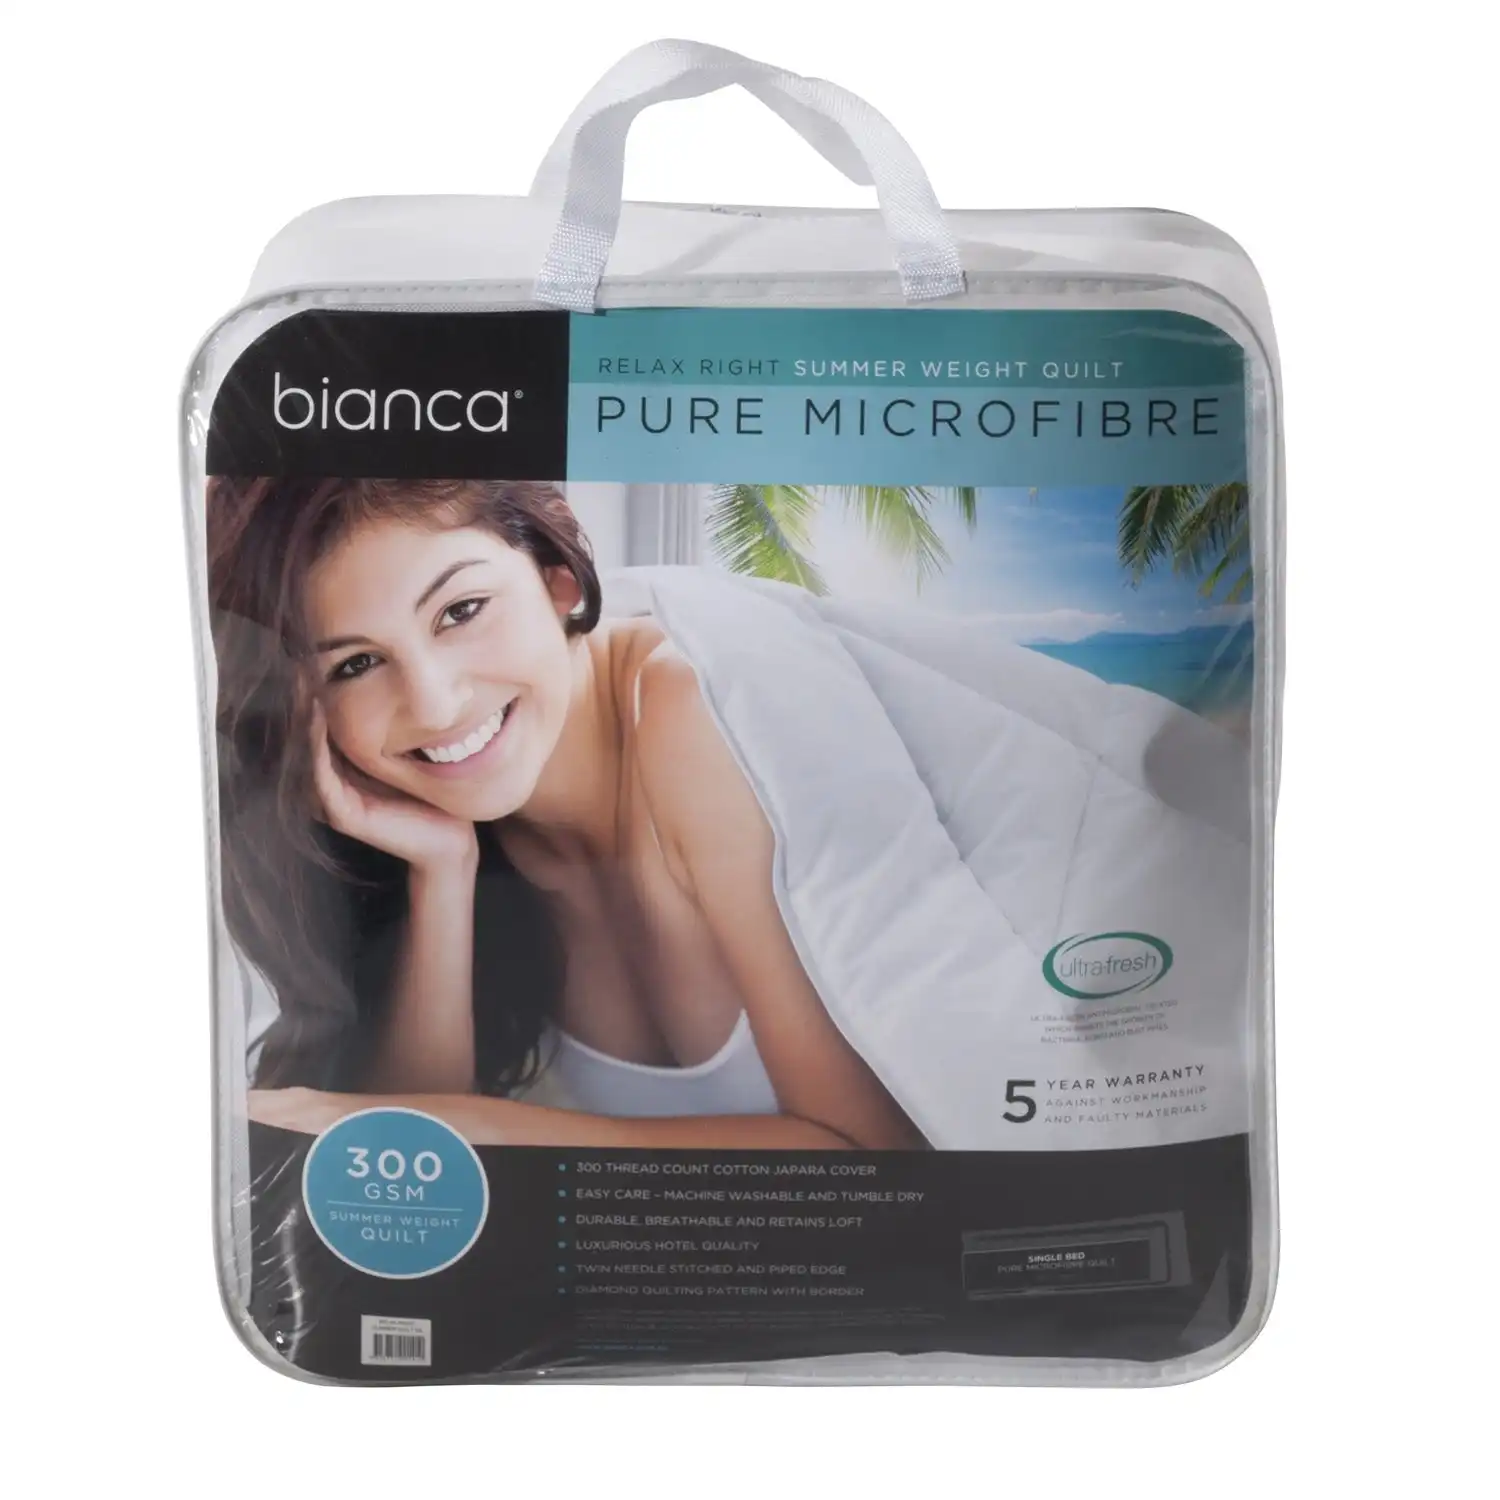 Bianca Bedding RELAX RIGHT PURE MICROFIBRE 300GSM SUMMER WEIGHT QUILT